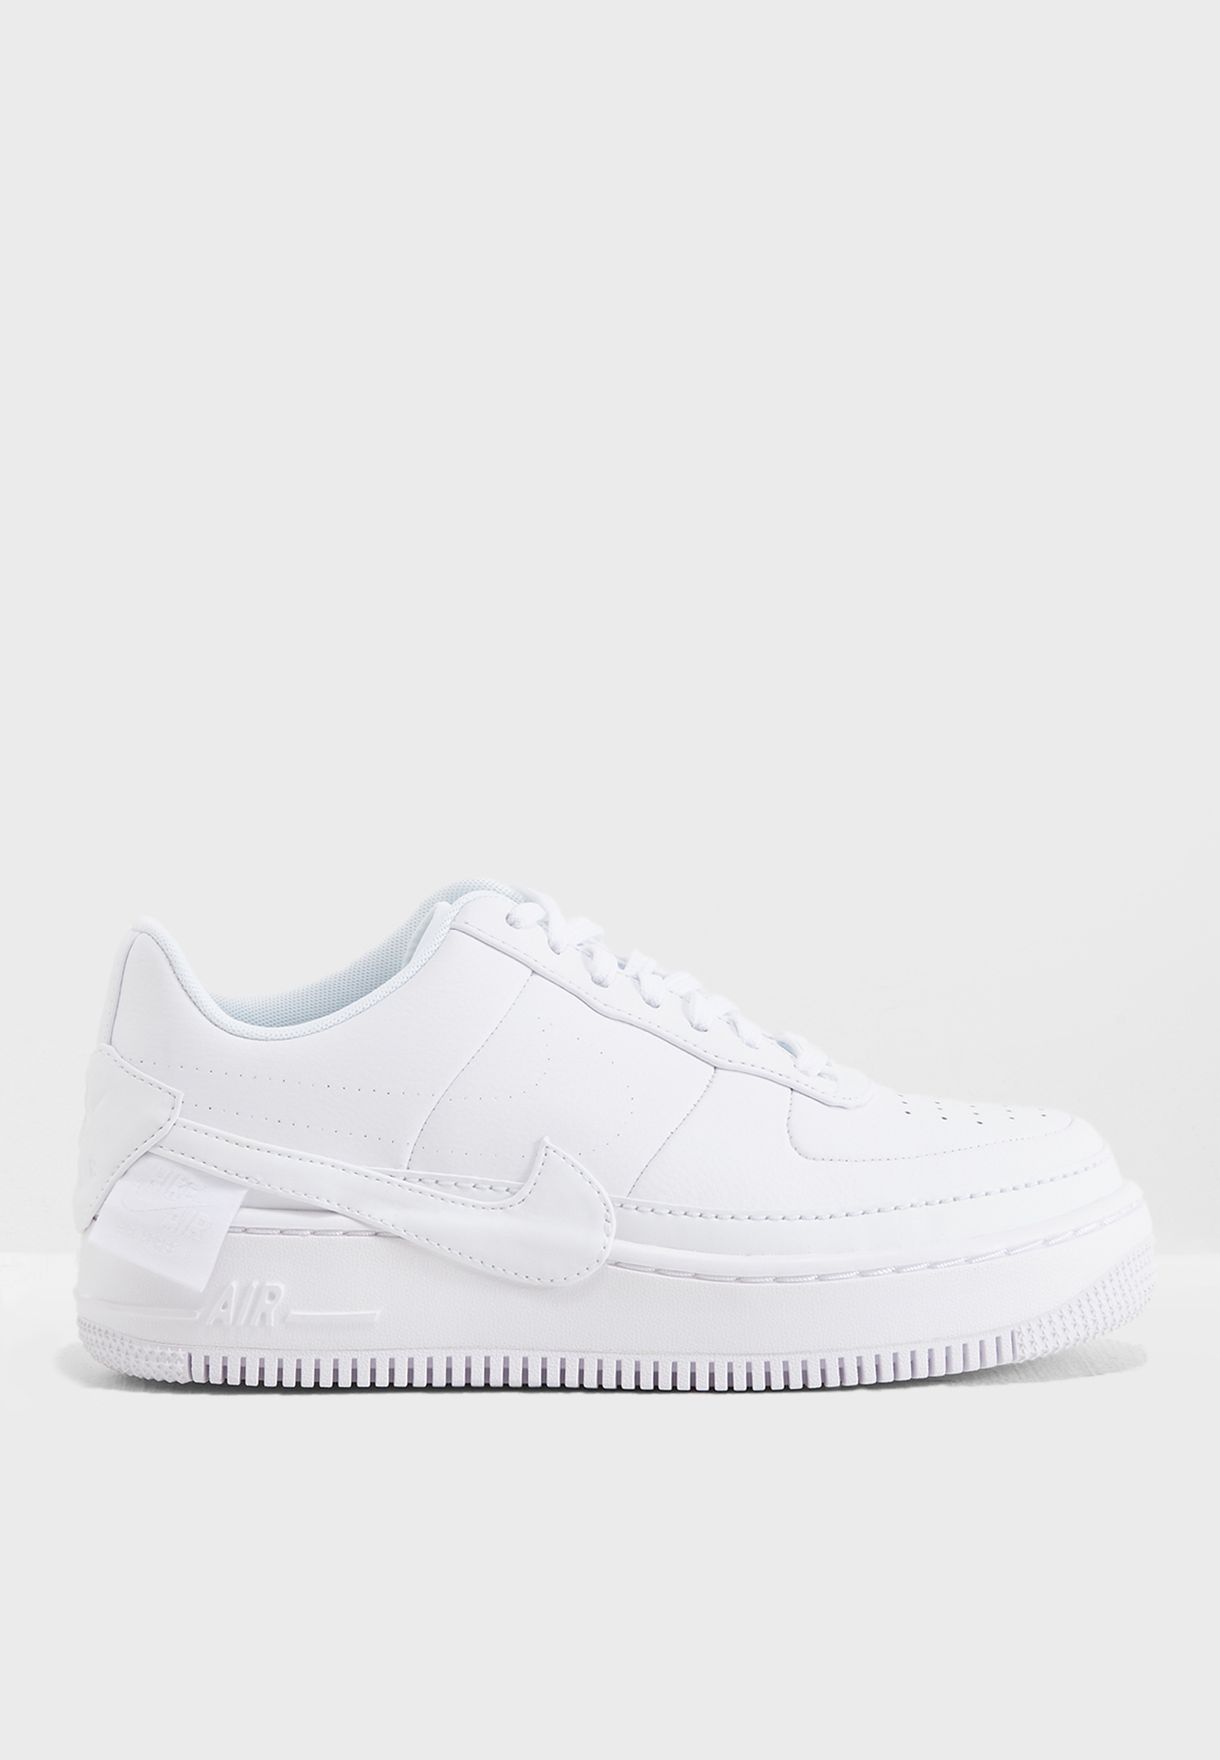 airforce 1 jester white